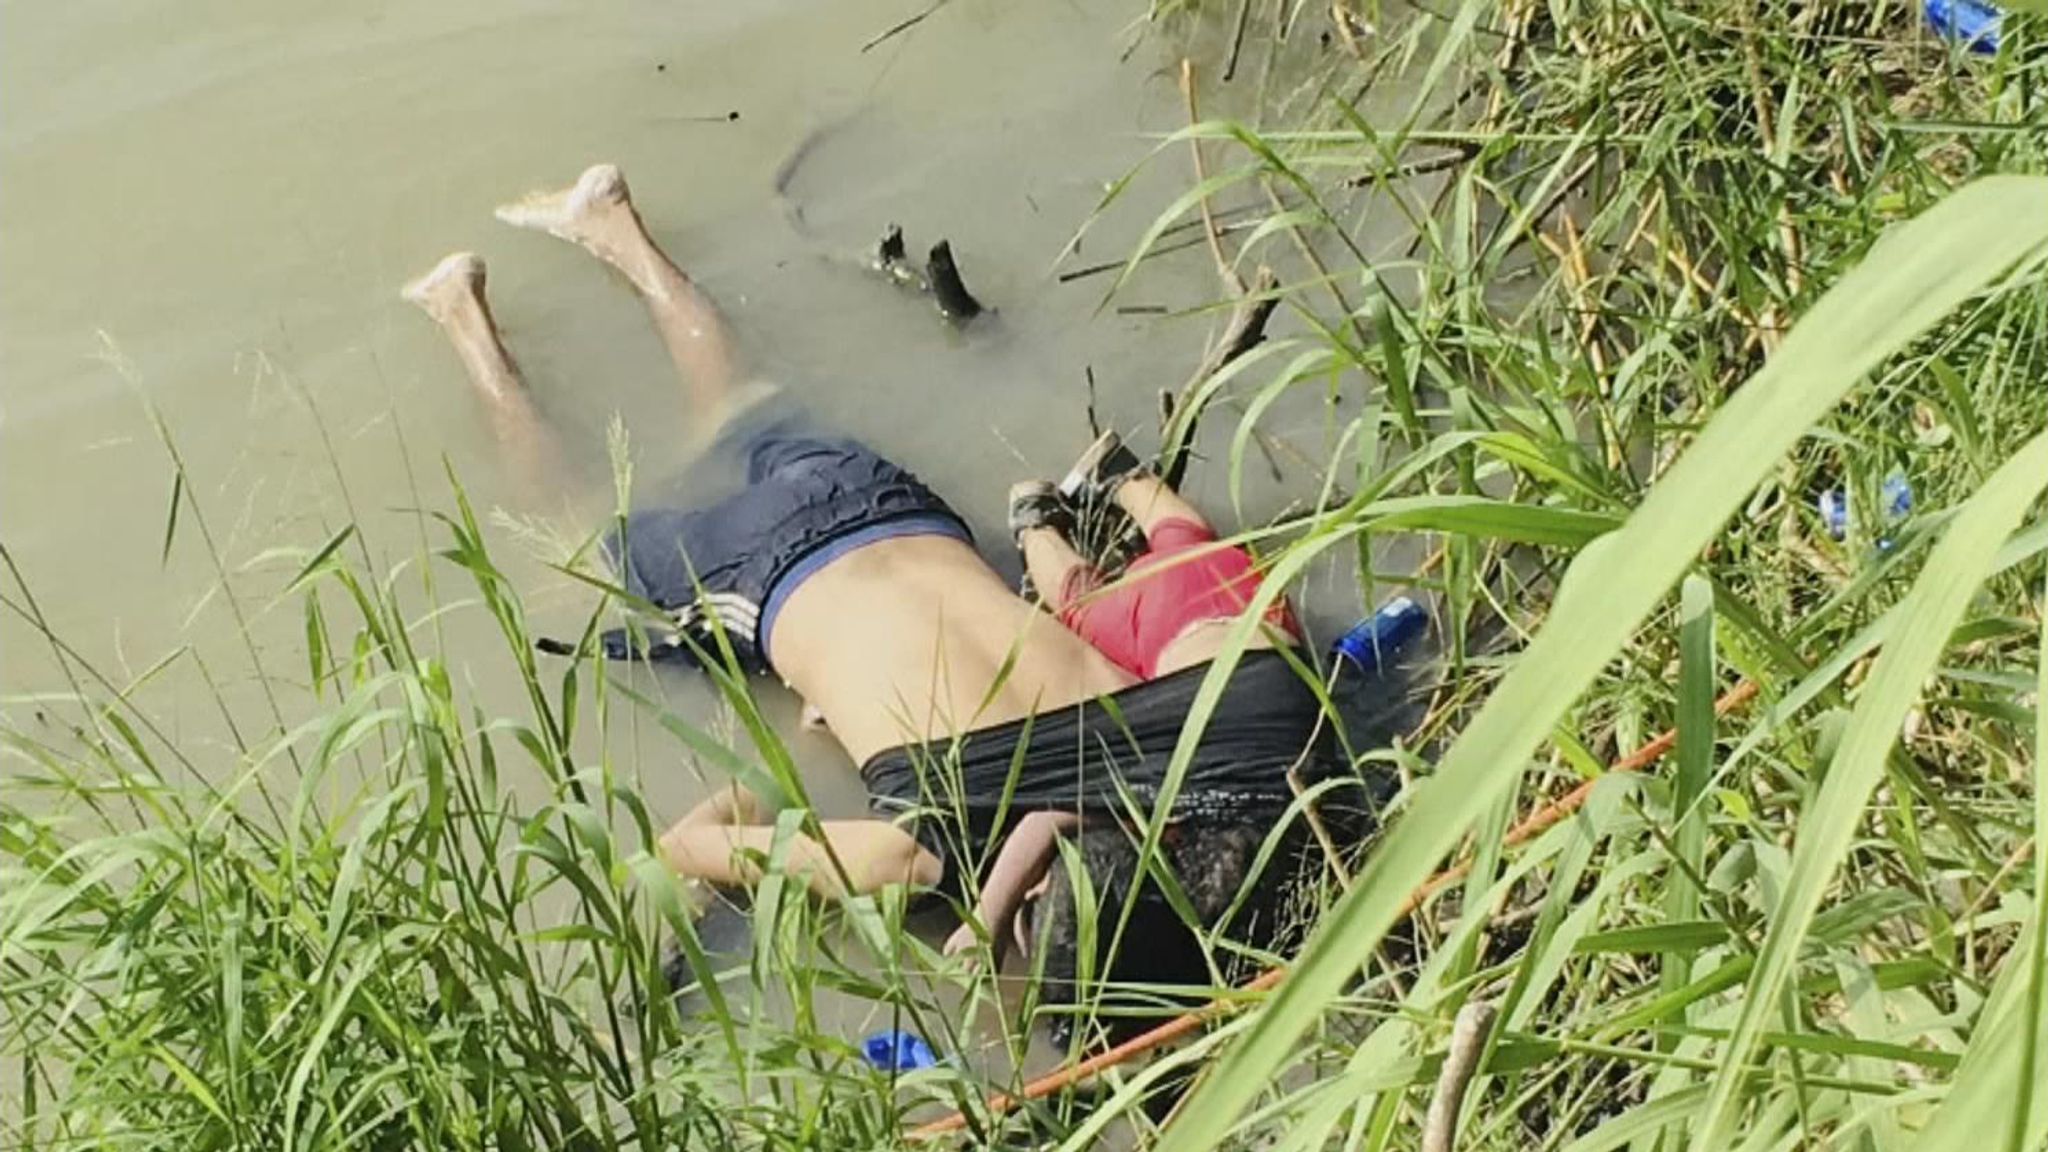 Family of drowned migrant father and girl destroyed